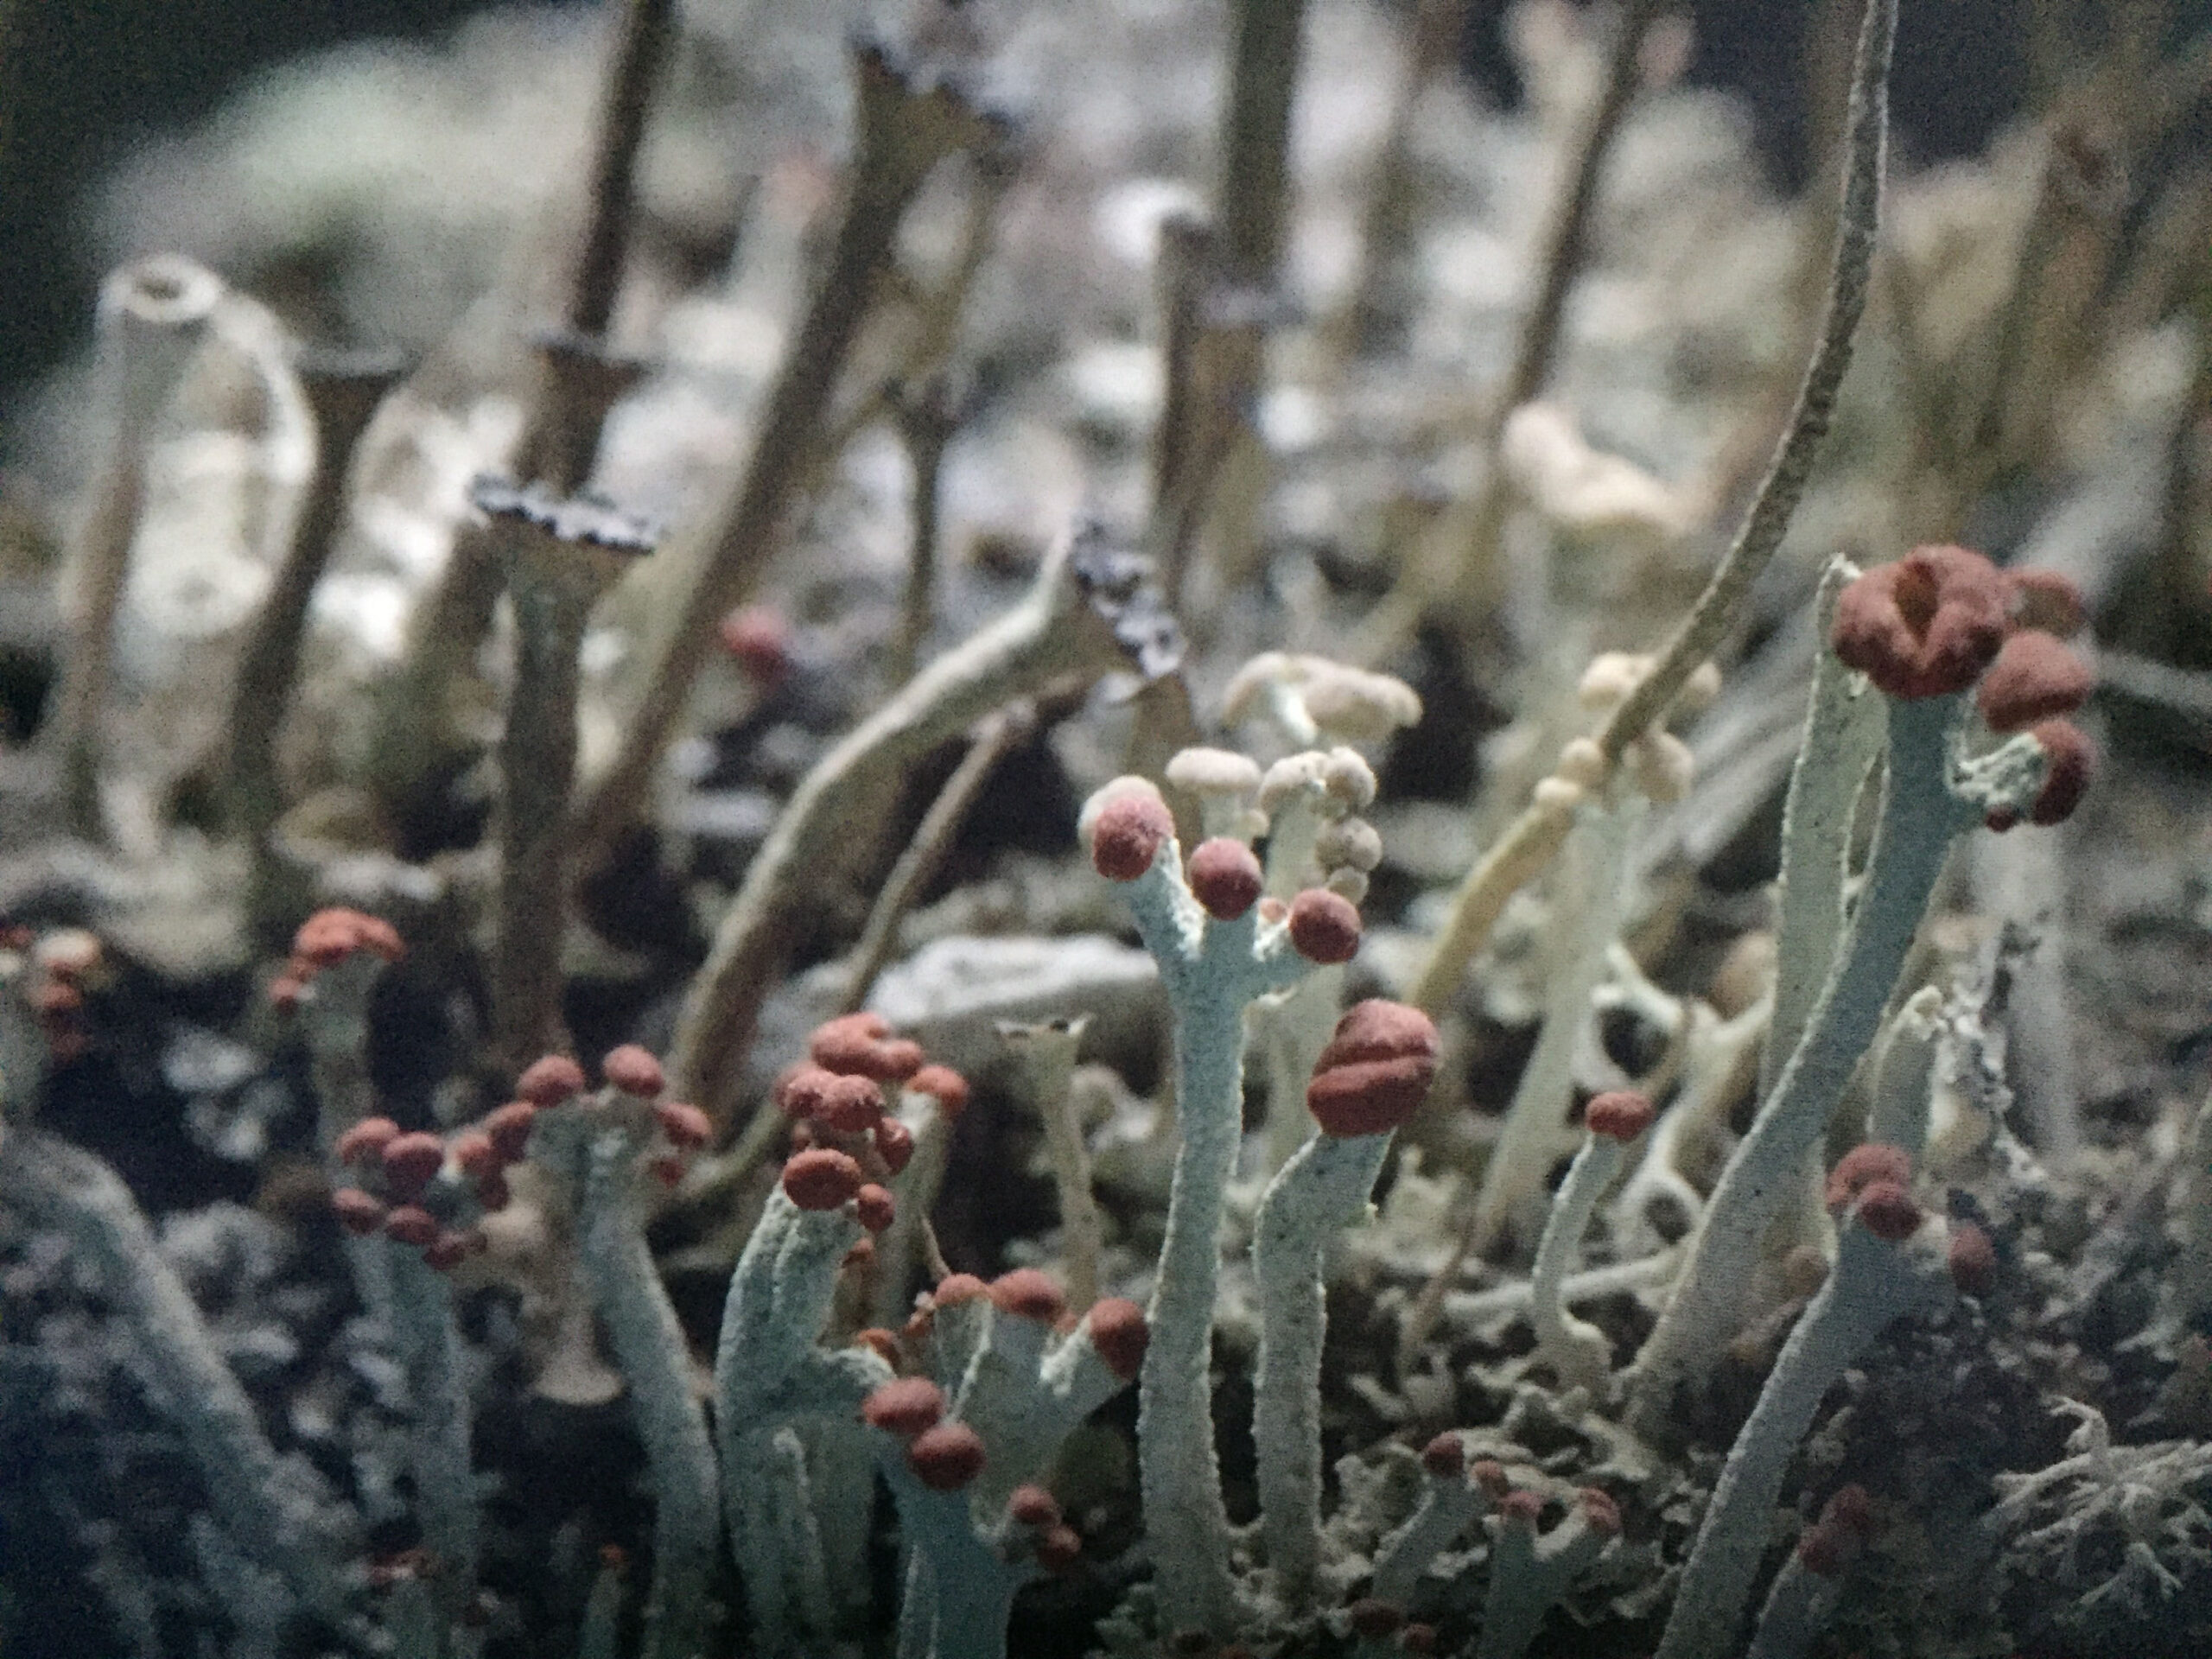 Image shows macro view of lichen - spindly alien like forms